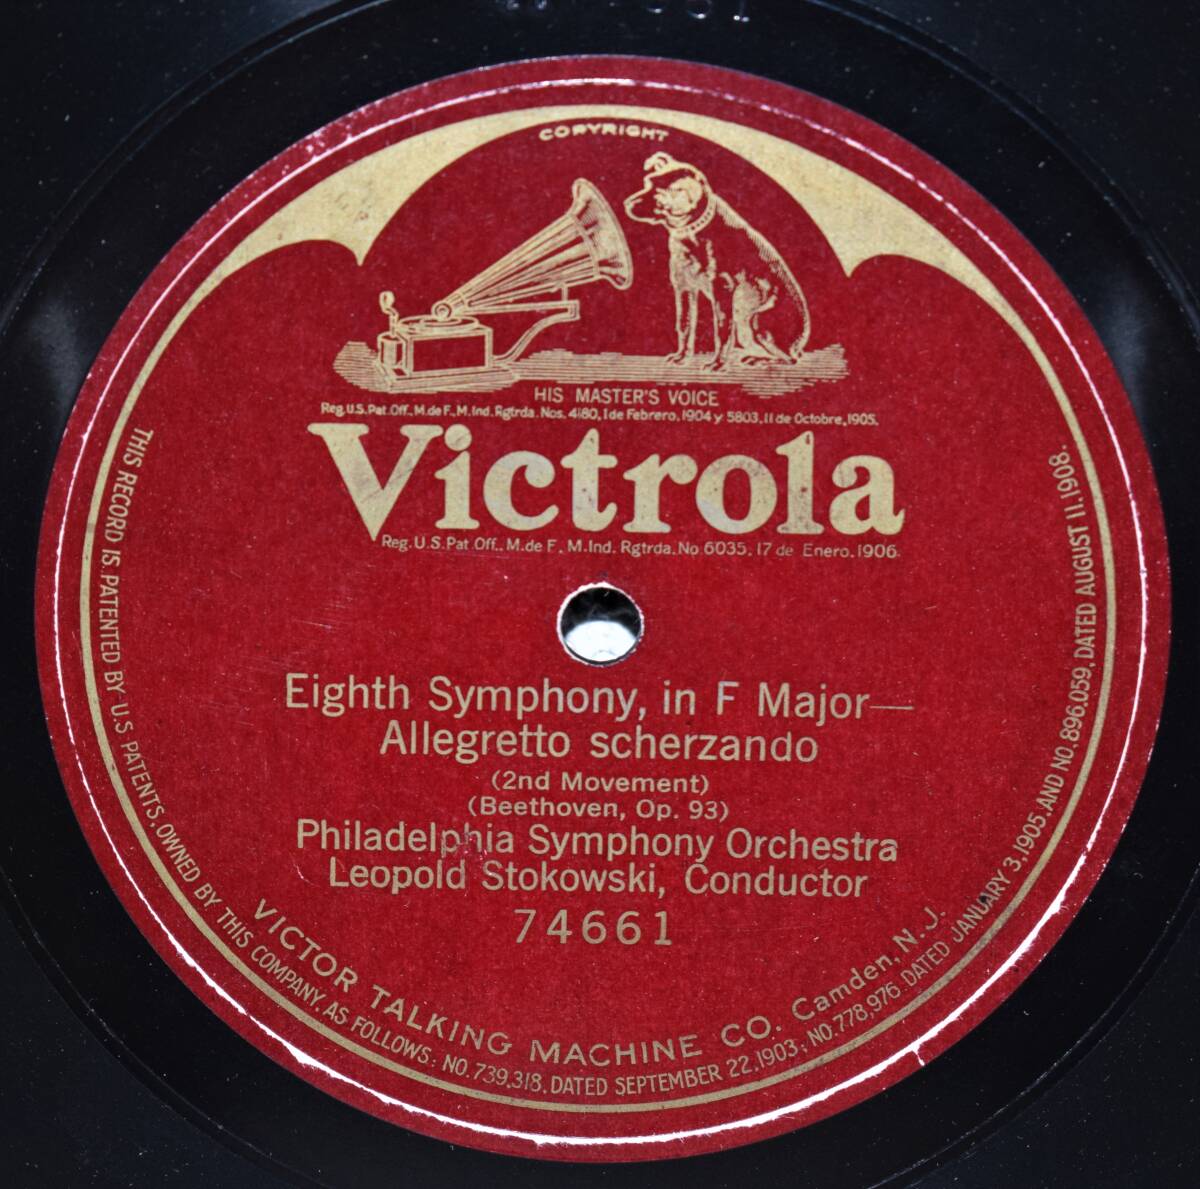  rice Victrola 74661 beige to-ven: symphony no. 8 number he length style Op.93 no. 2 comfort chapter Allegretto scherzando L* -stroke kof ski finger .12.SP one side record 